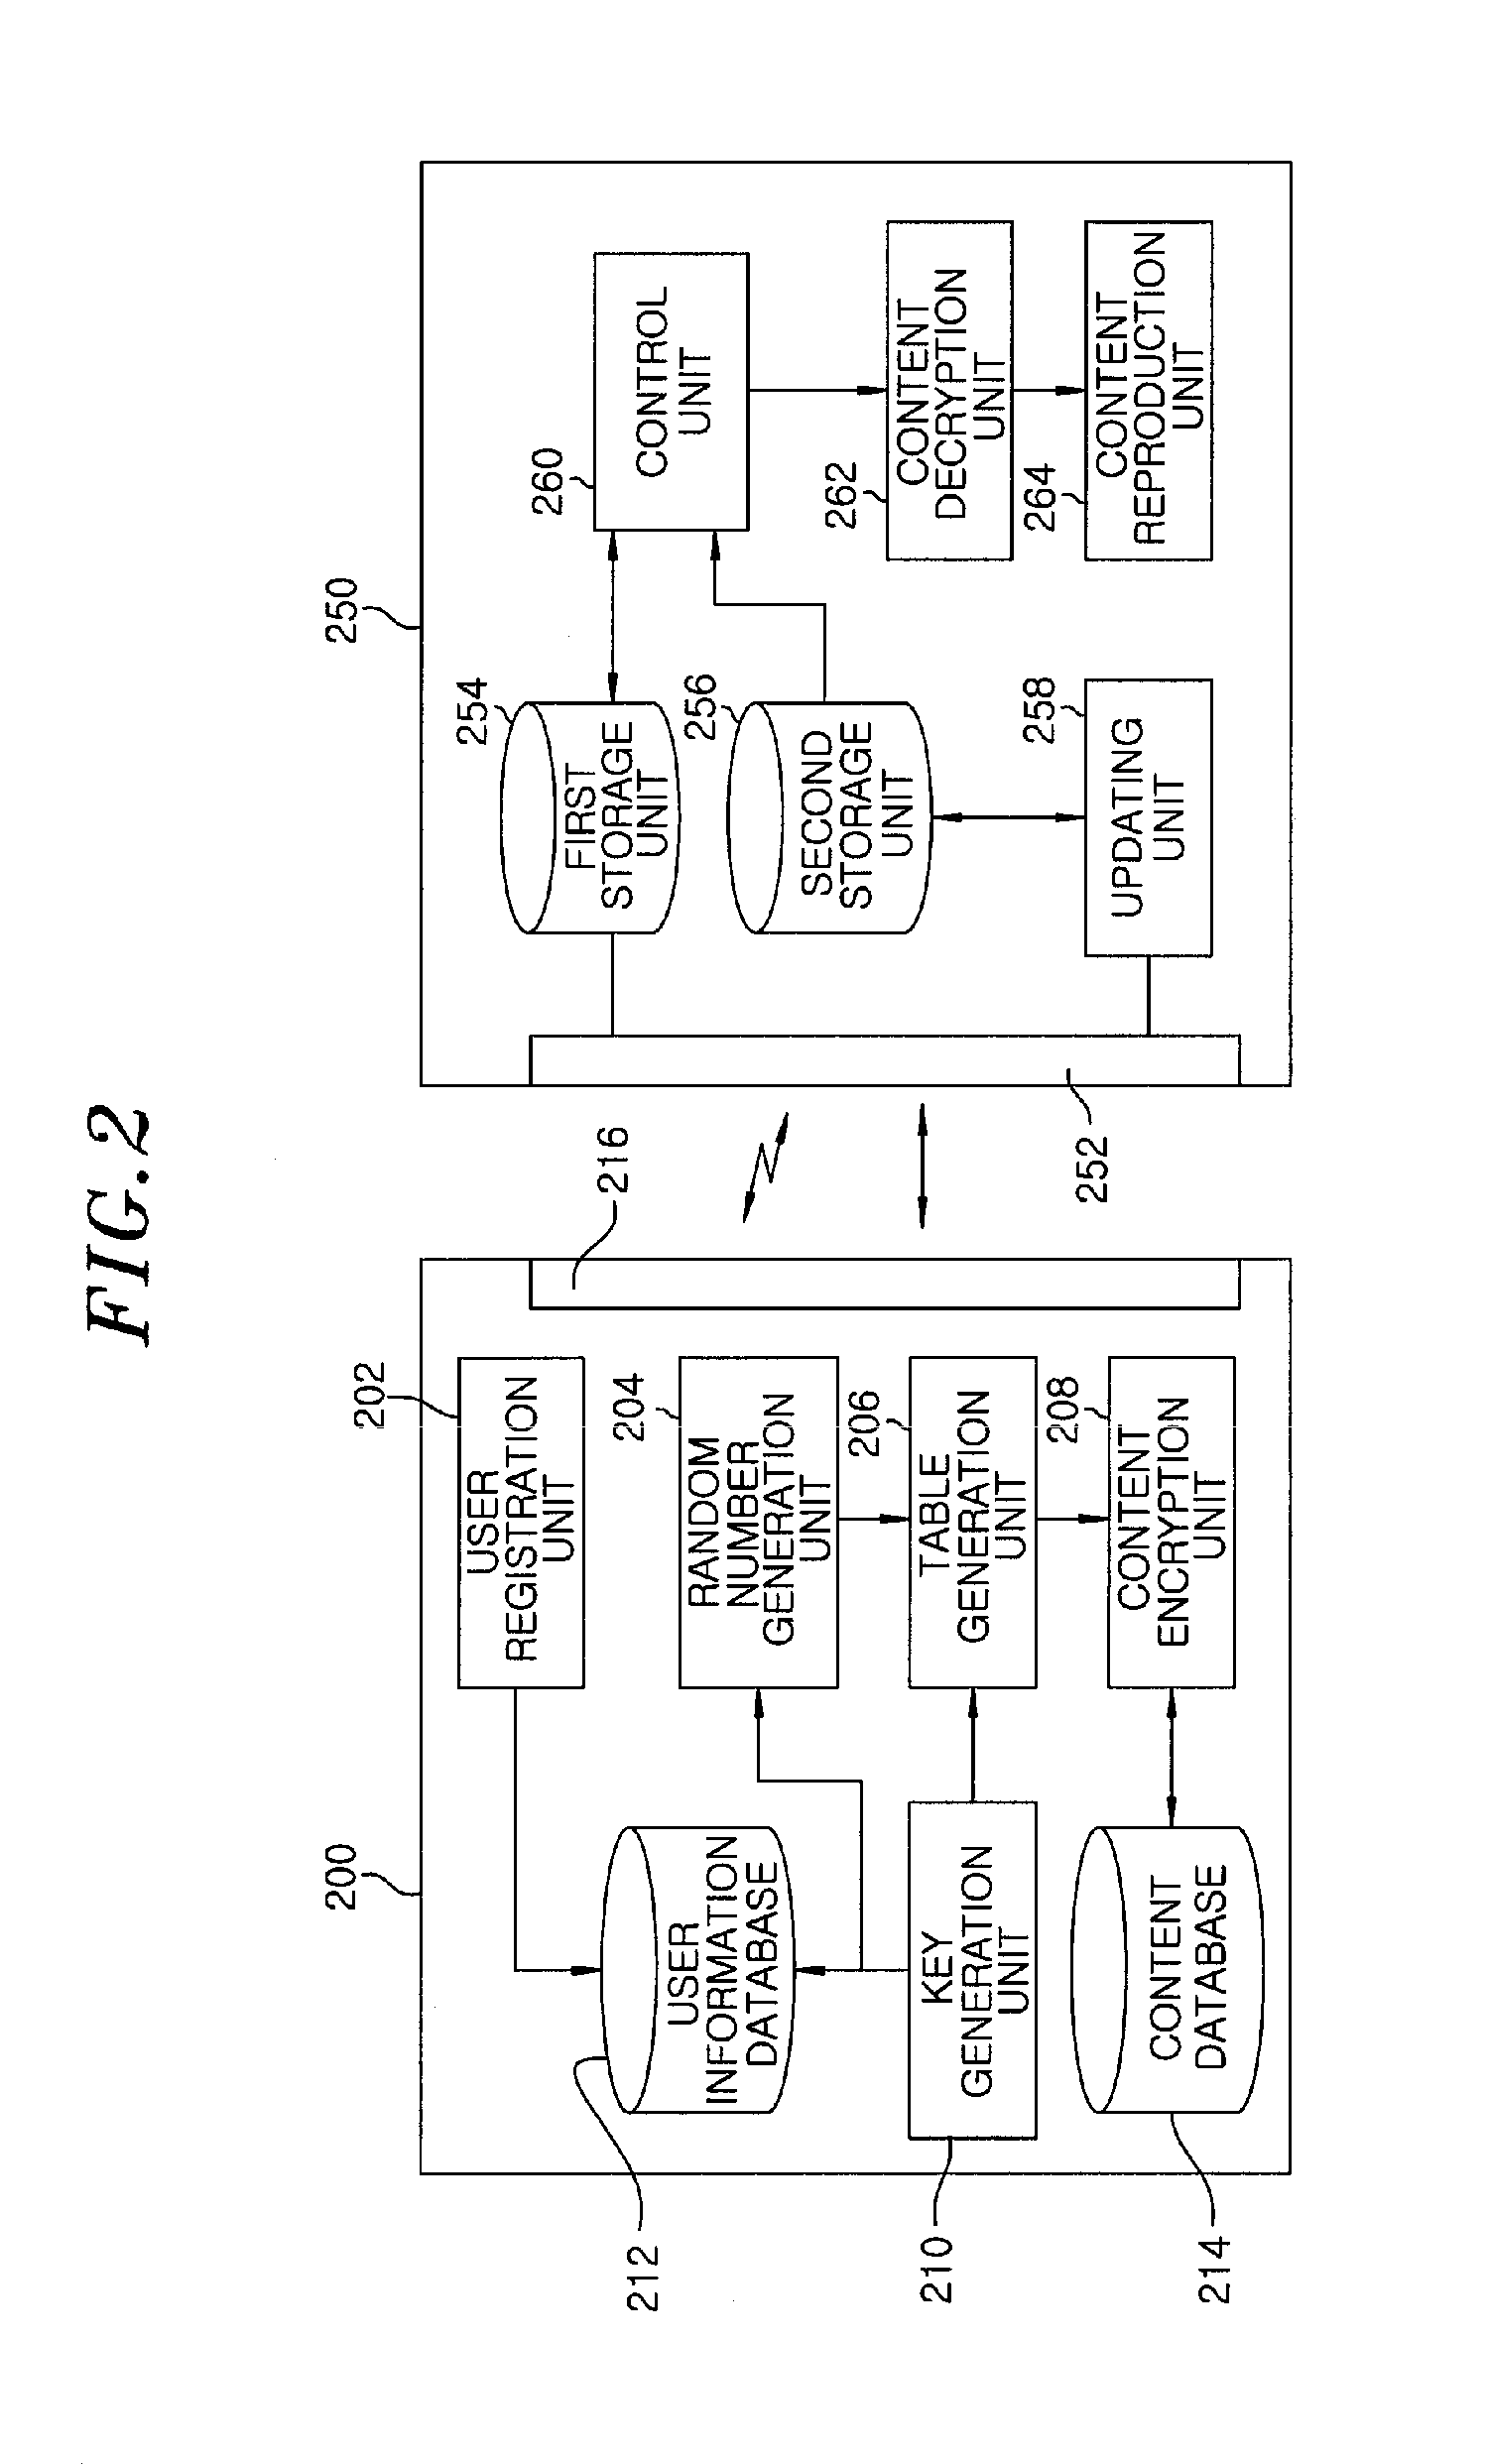 Content protection apparatus and content encryption and decryption apparatus using white-box encryption table